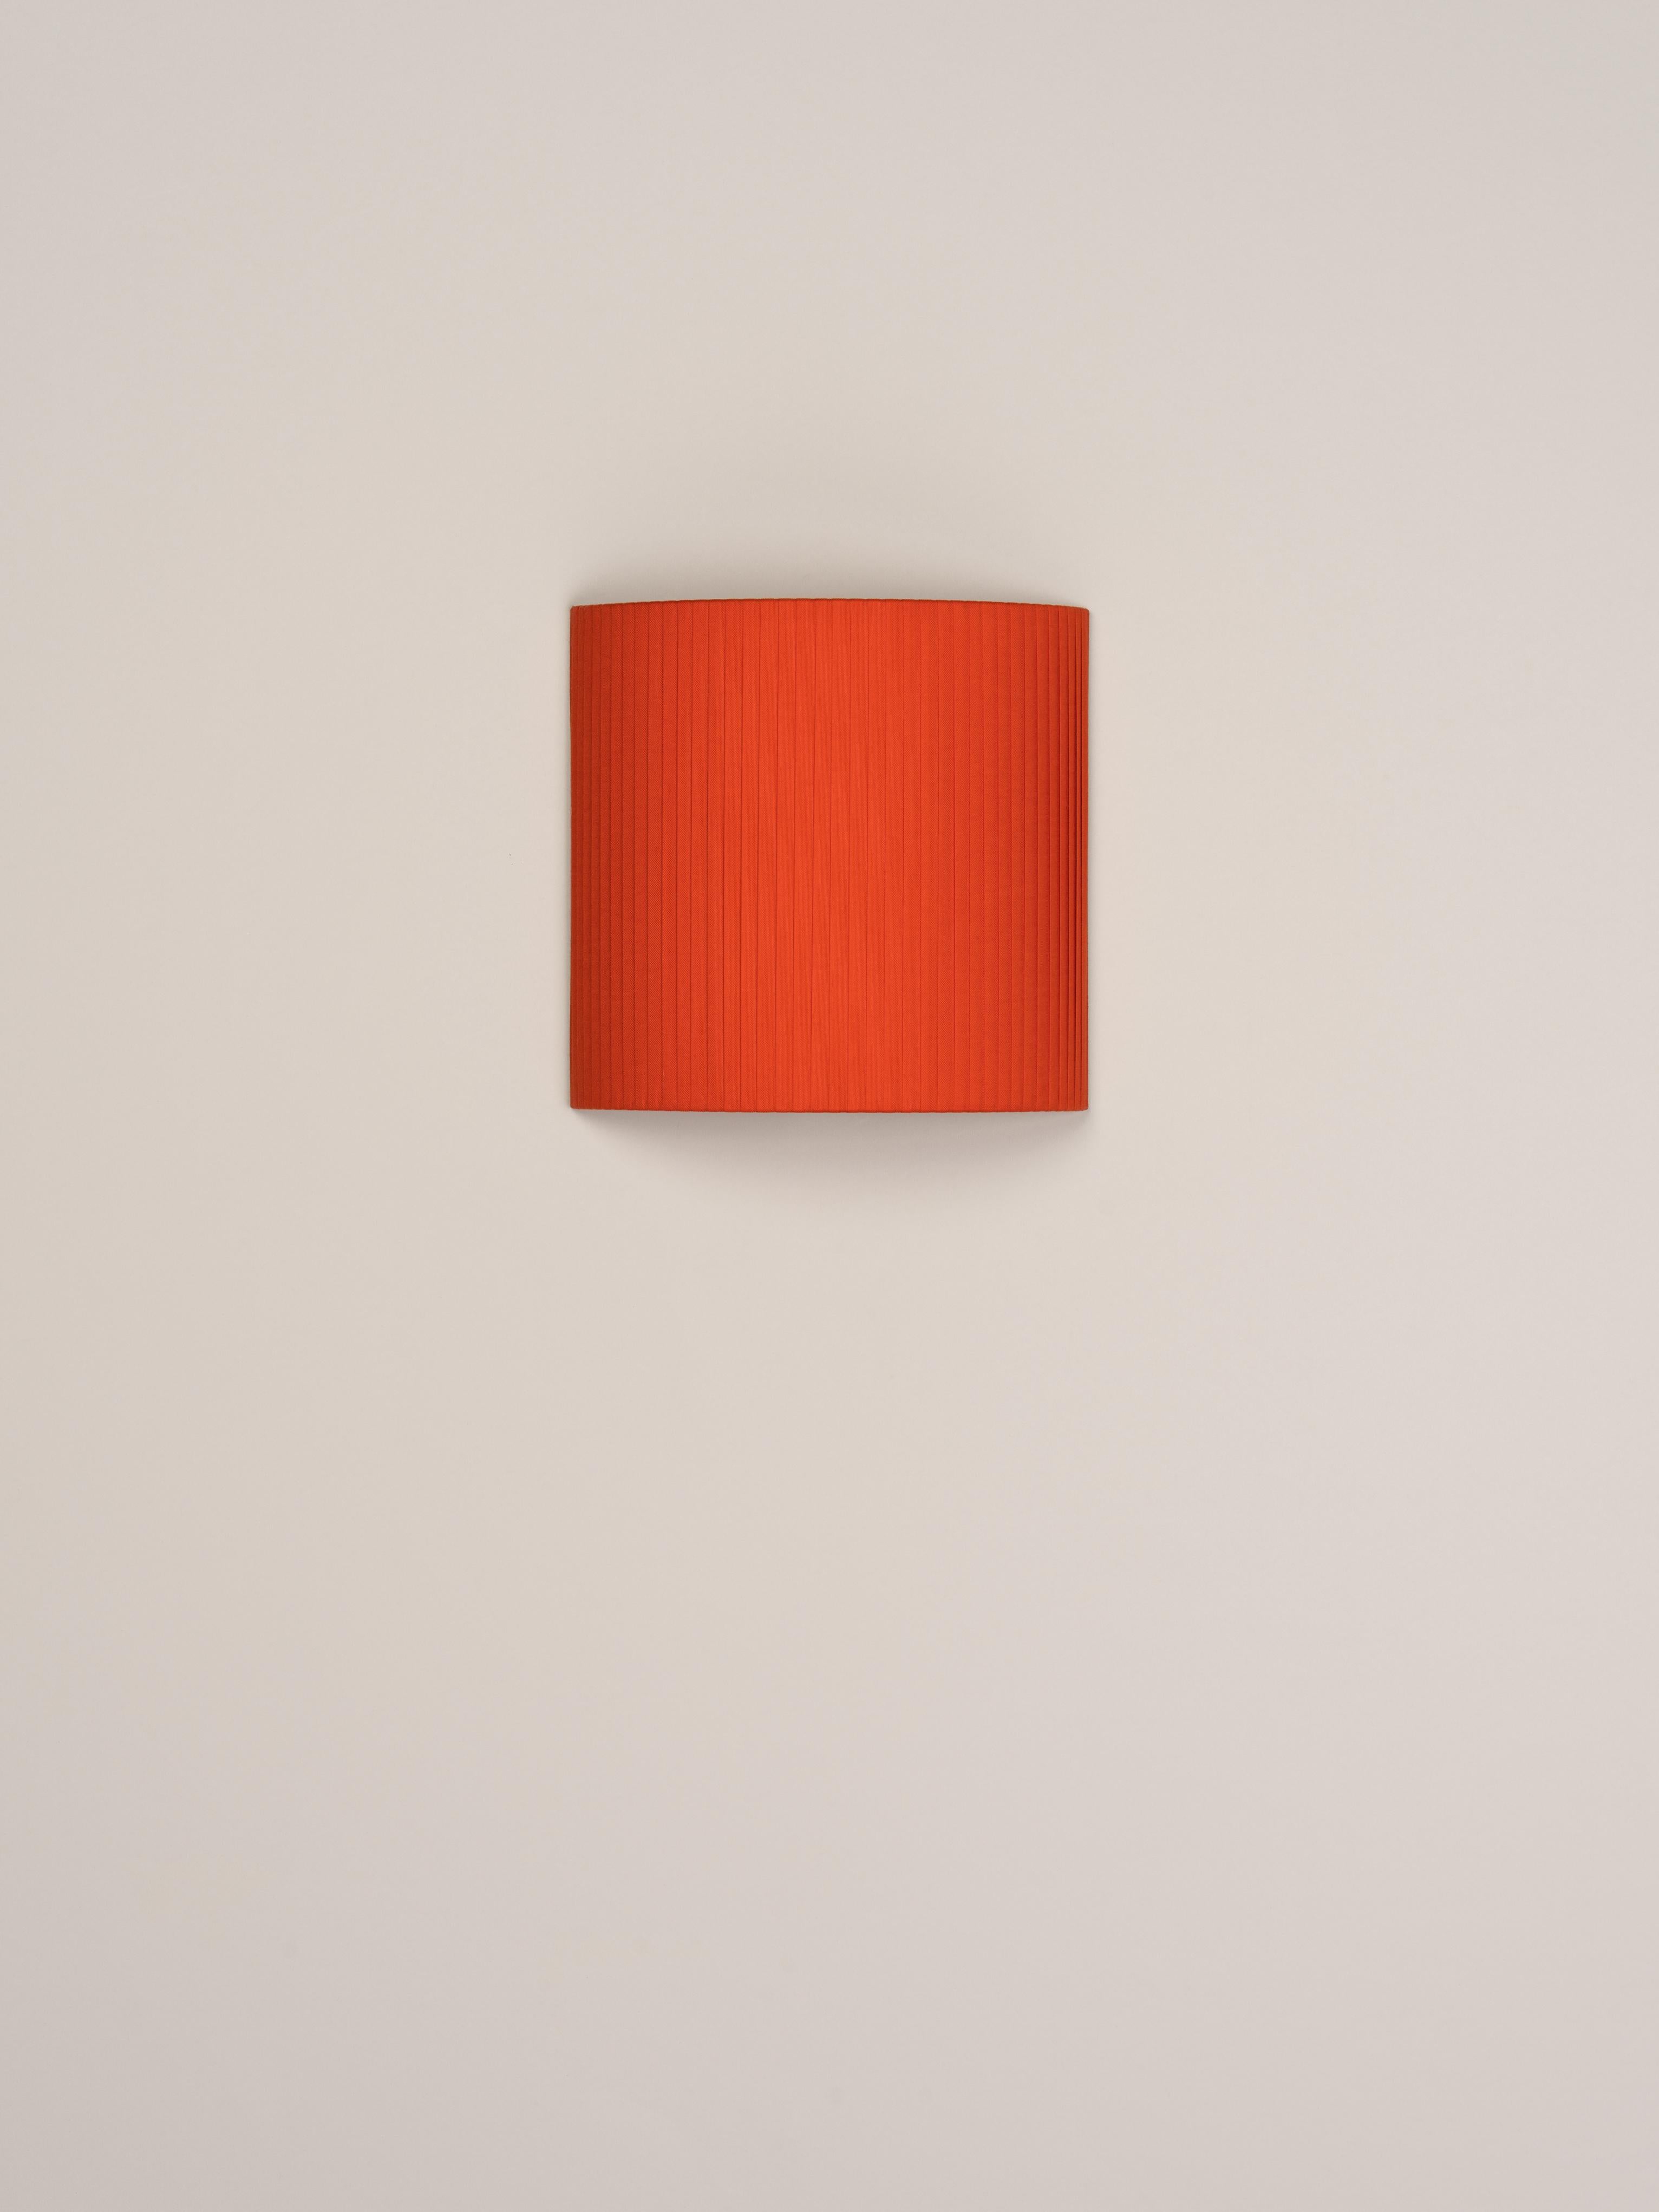 Red comodín cuadrado wall lamp by Santa & Cole
Dimensions: D 31 x W 13 x H 30 cm
Materials: Metal, ribbon.

This minimalist wall lamp humanises neutral spaces with its colourful and functional sobriety. The shade is fondly hand-ribboned, piece